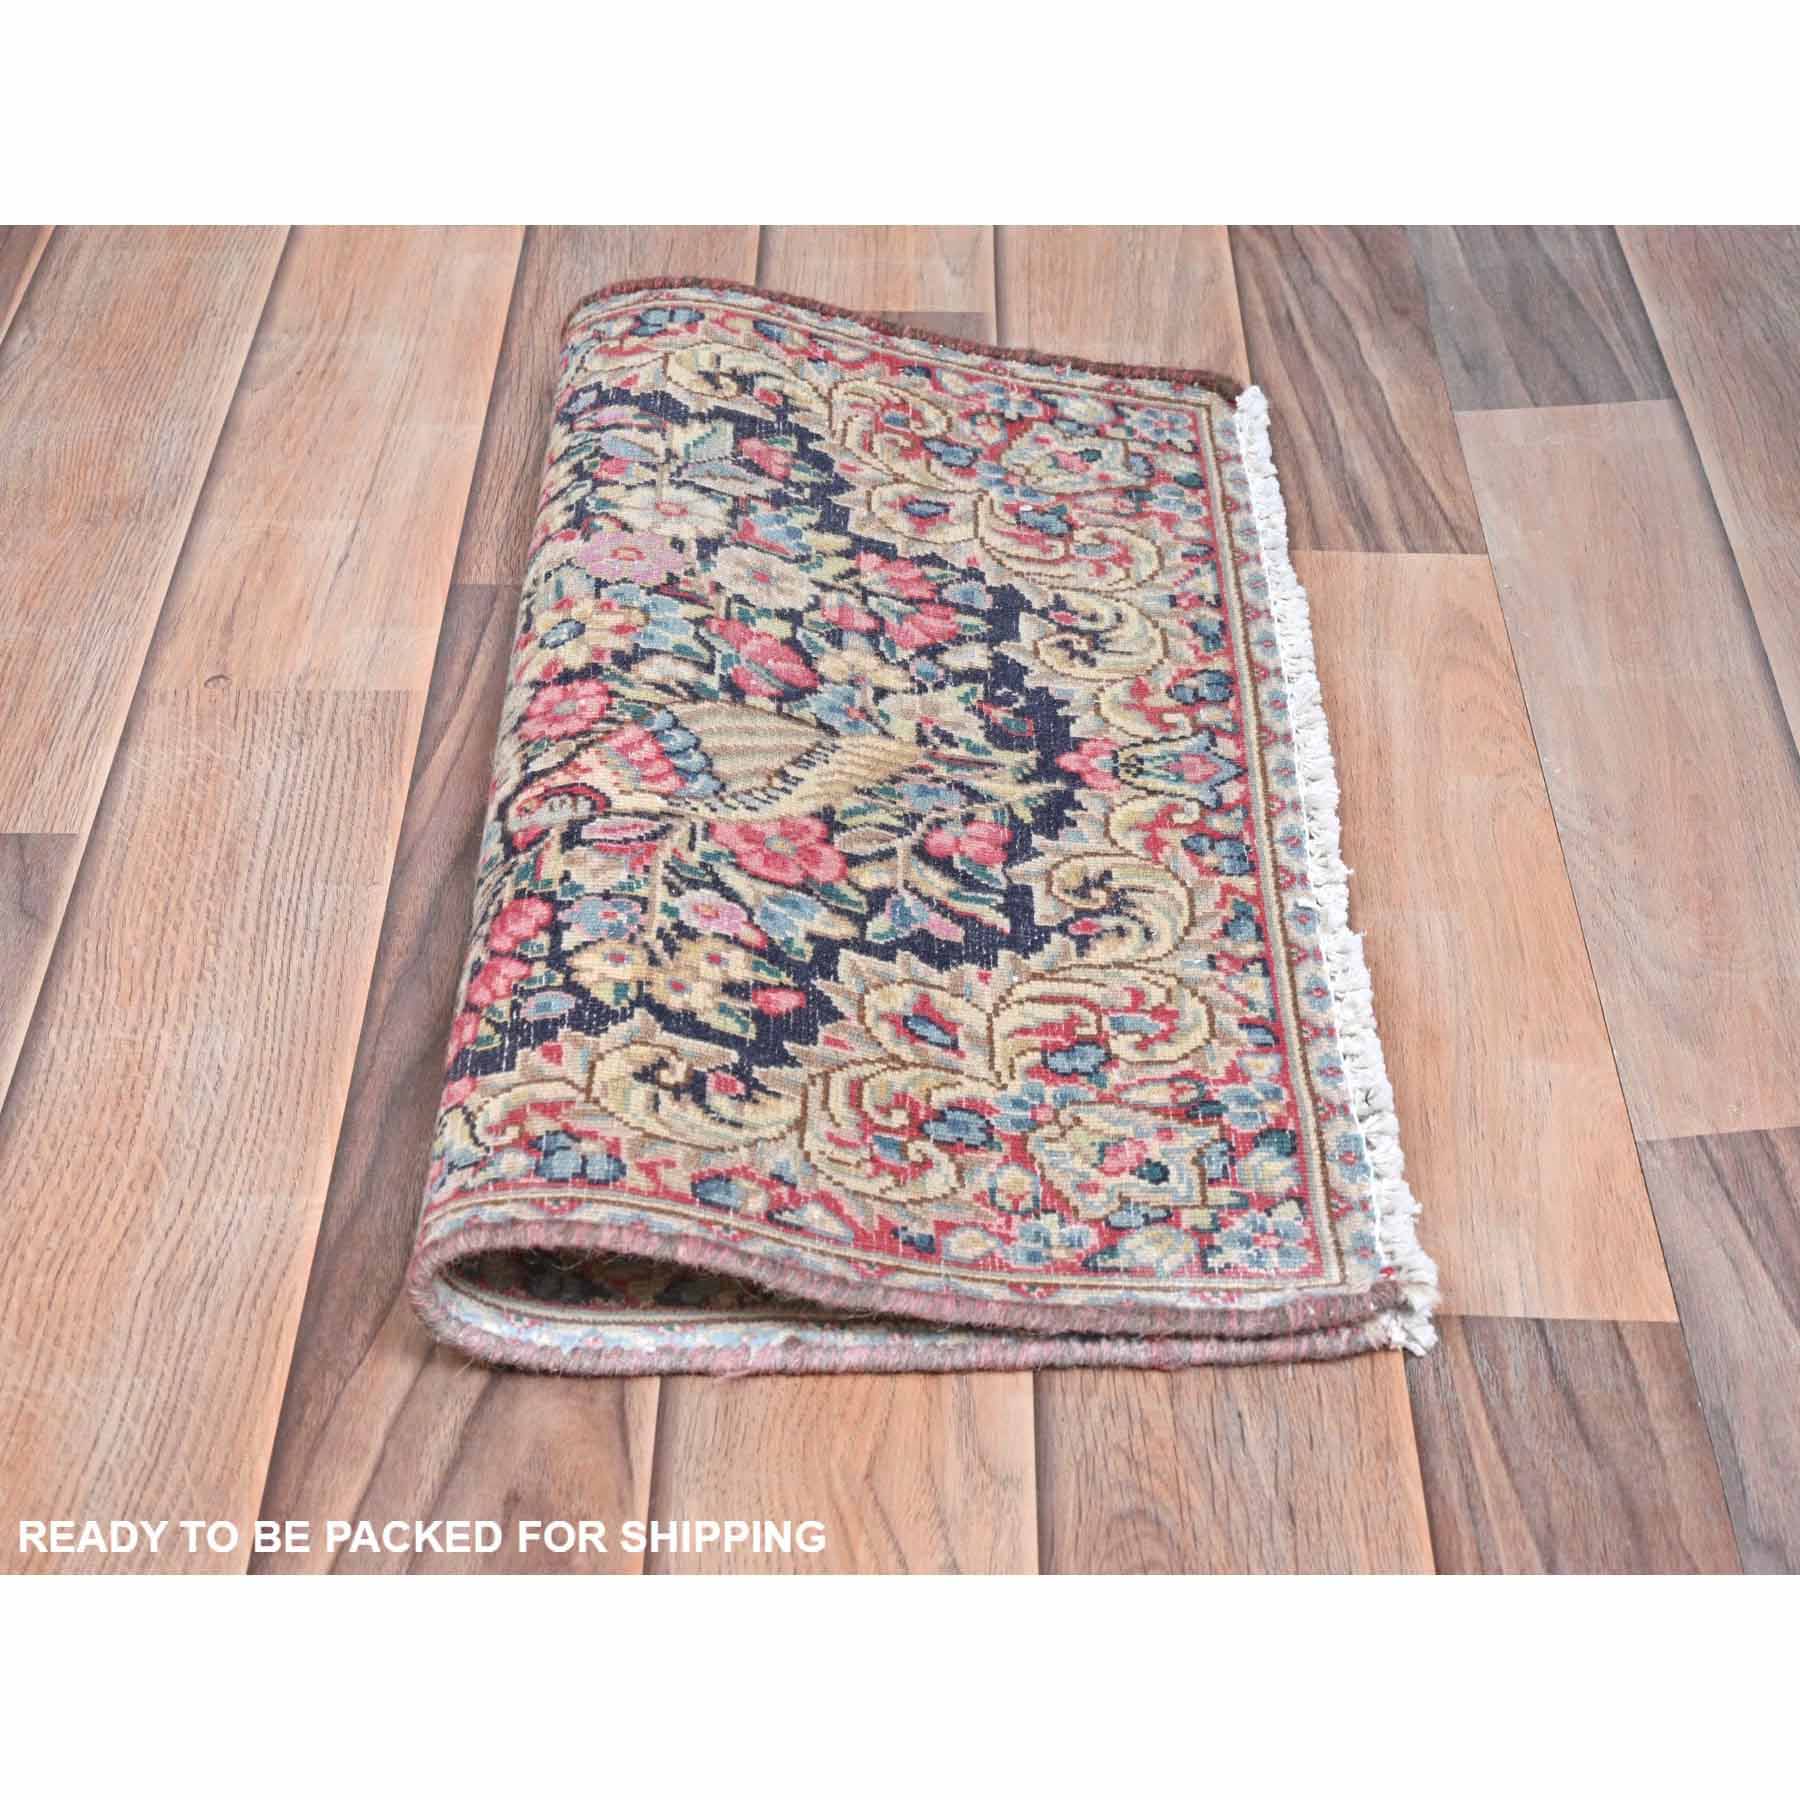 Overdyed-Vintage-Hand-Knotted-Rug-409785